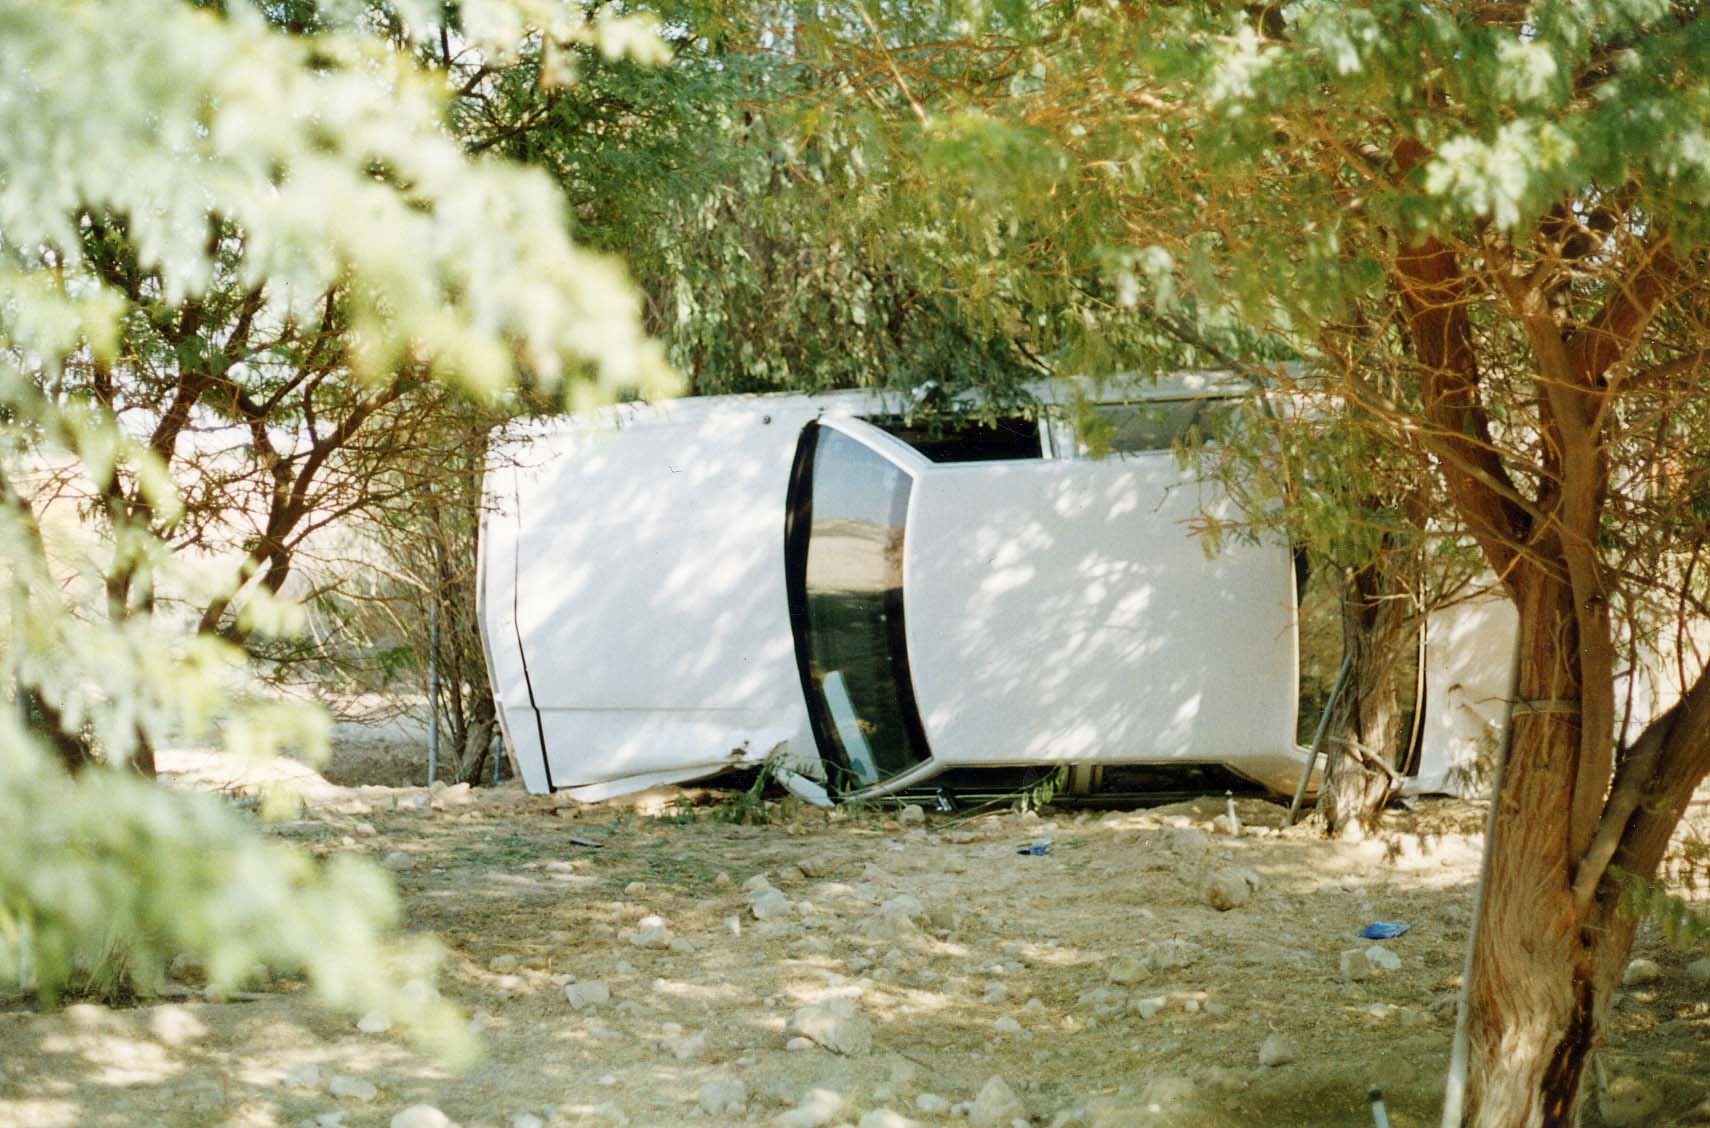 My first car wreck (January 1995)